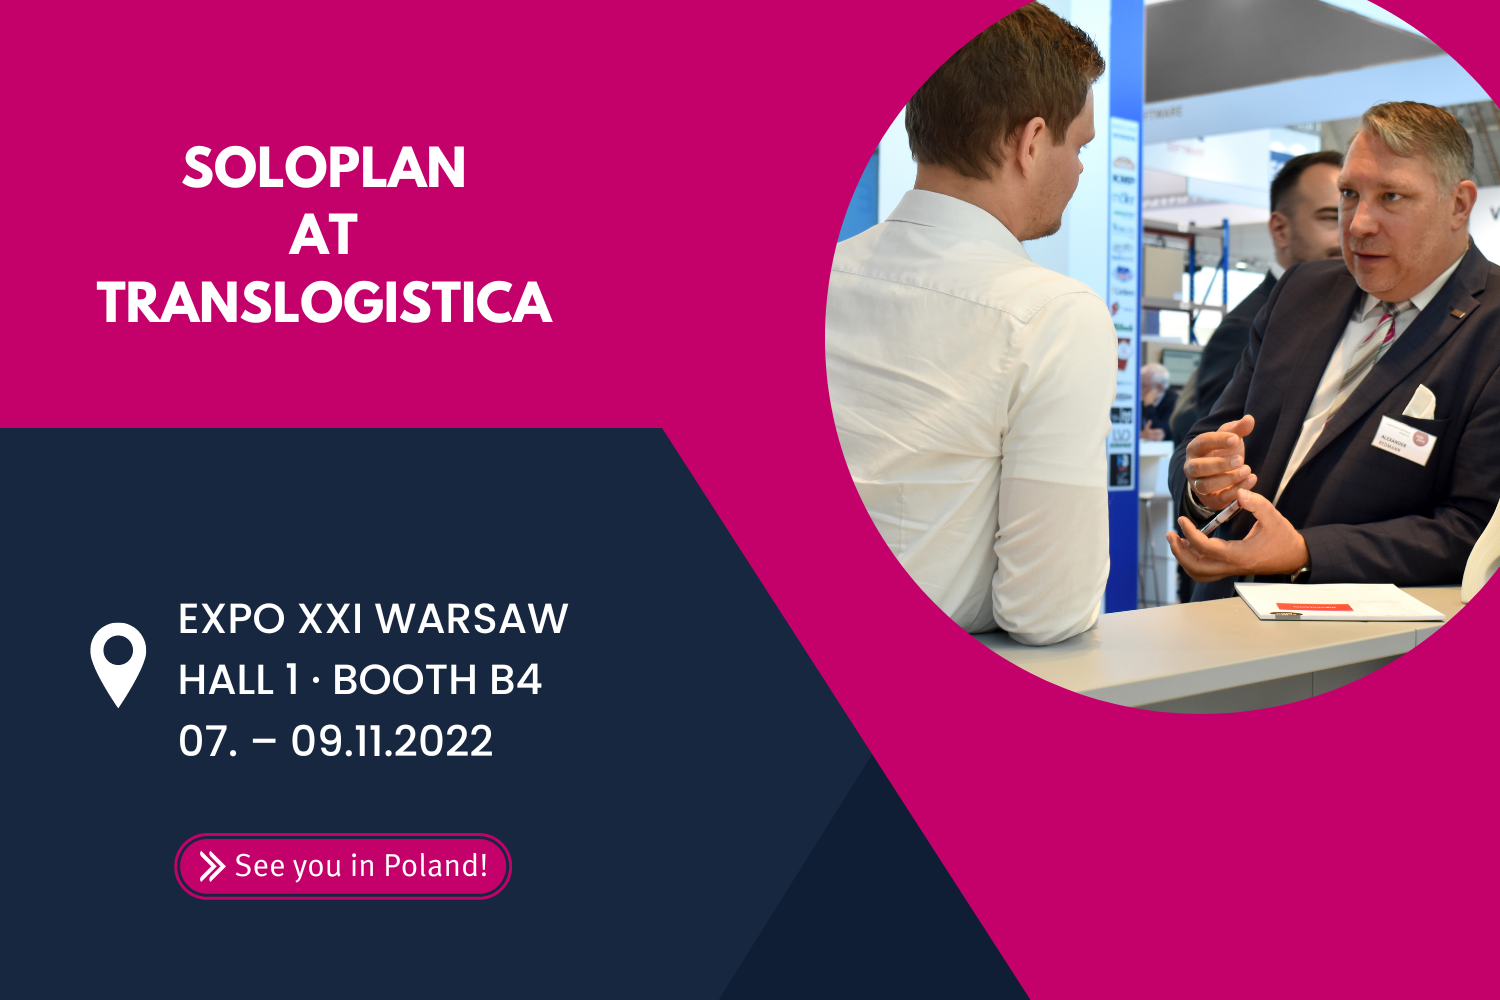 Soloplan at the TransLogistica fair in Warsaw